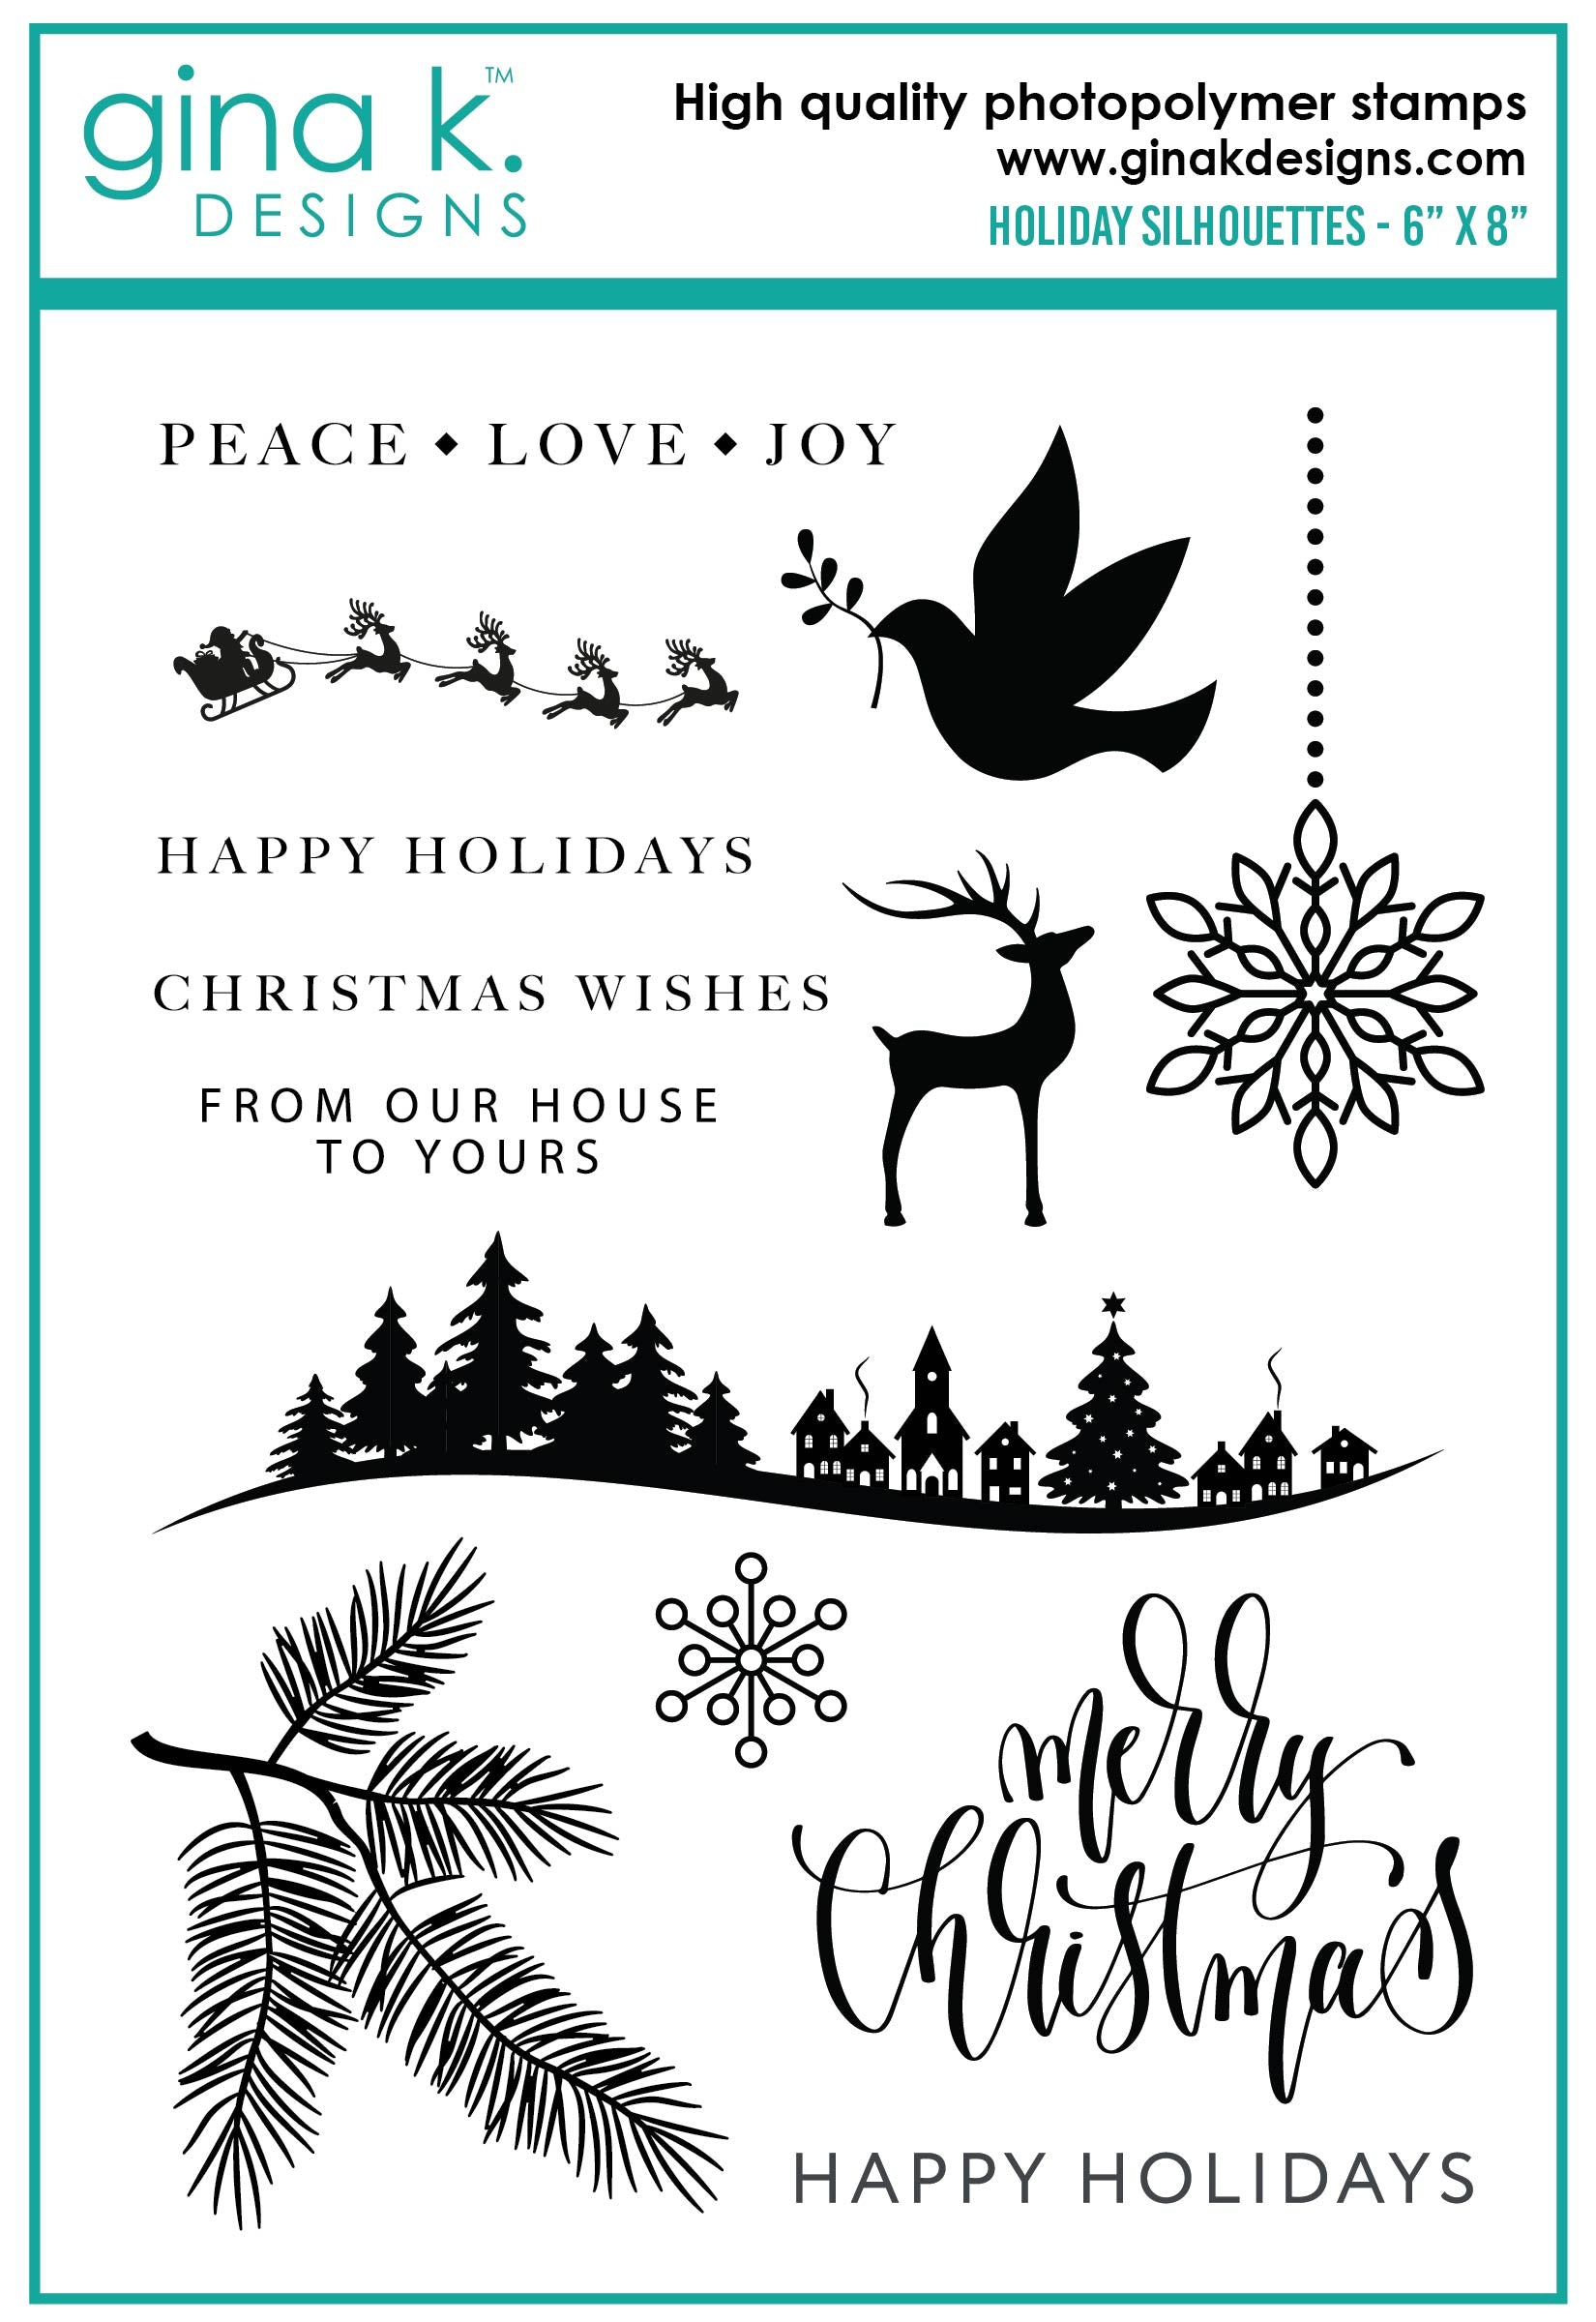 STAMPS- Holiday Silhouettes